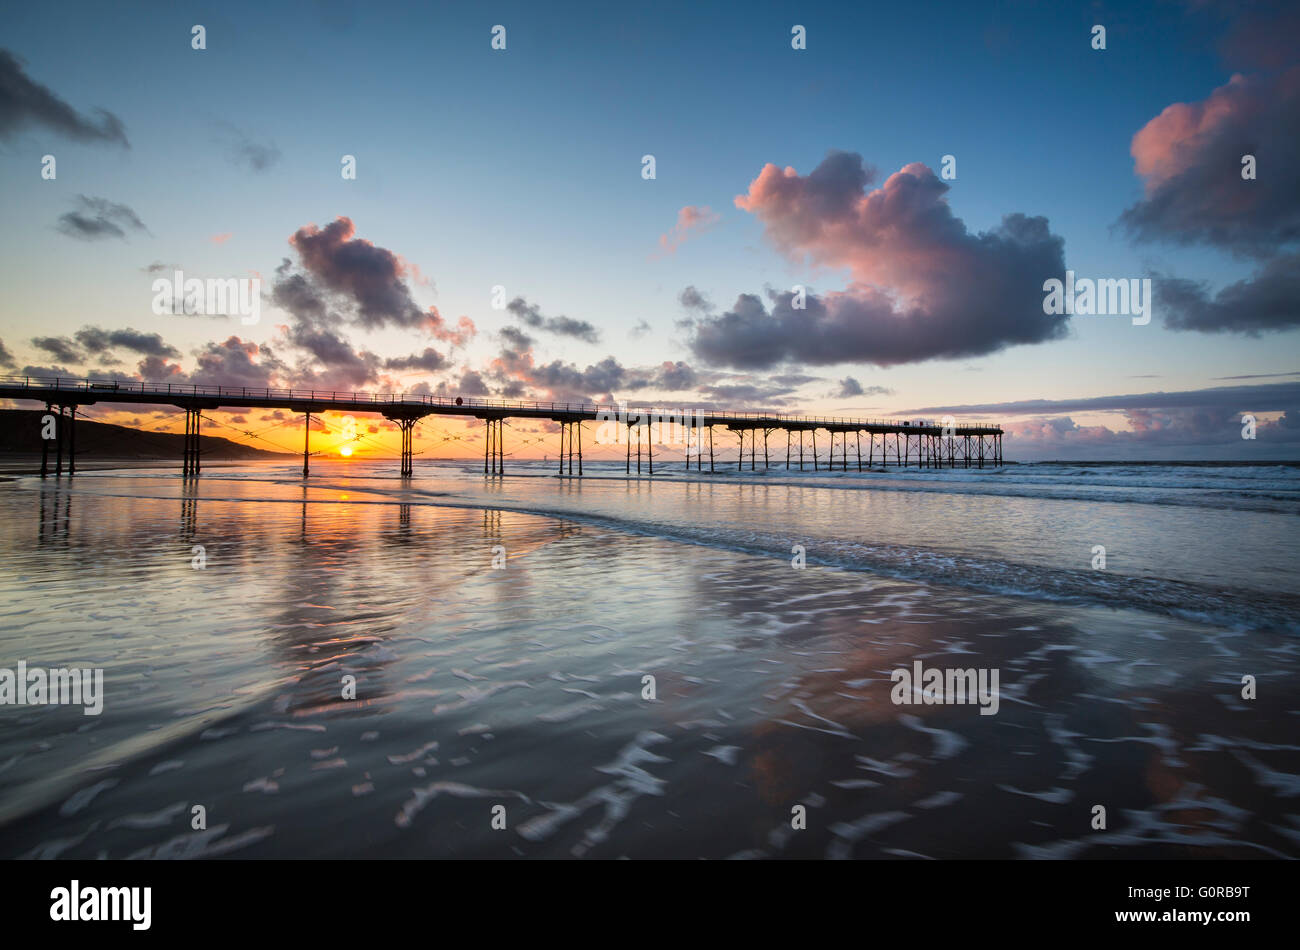 Saltburn Beach and Pier at Spring Sunset, Cleveland Stock Photo